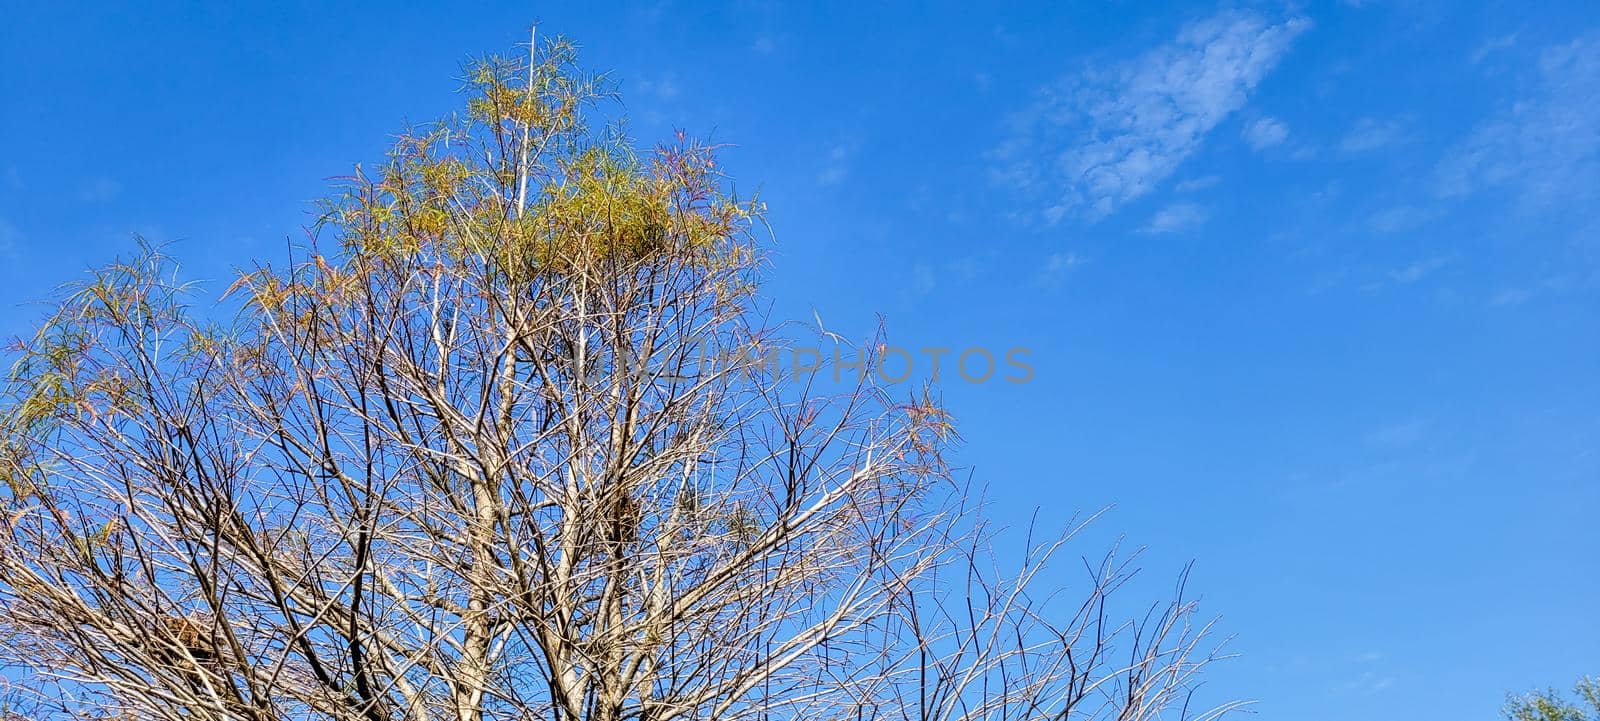 blue sky in park with dry trees in winter which can be used as background